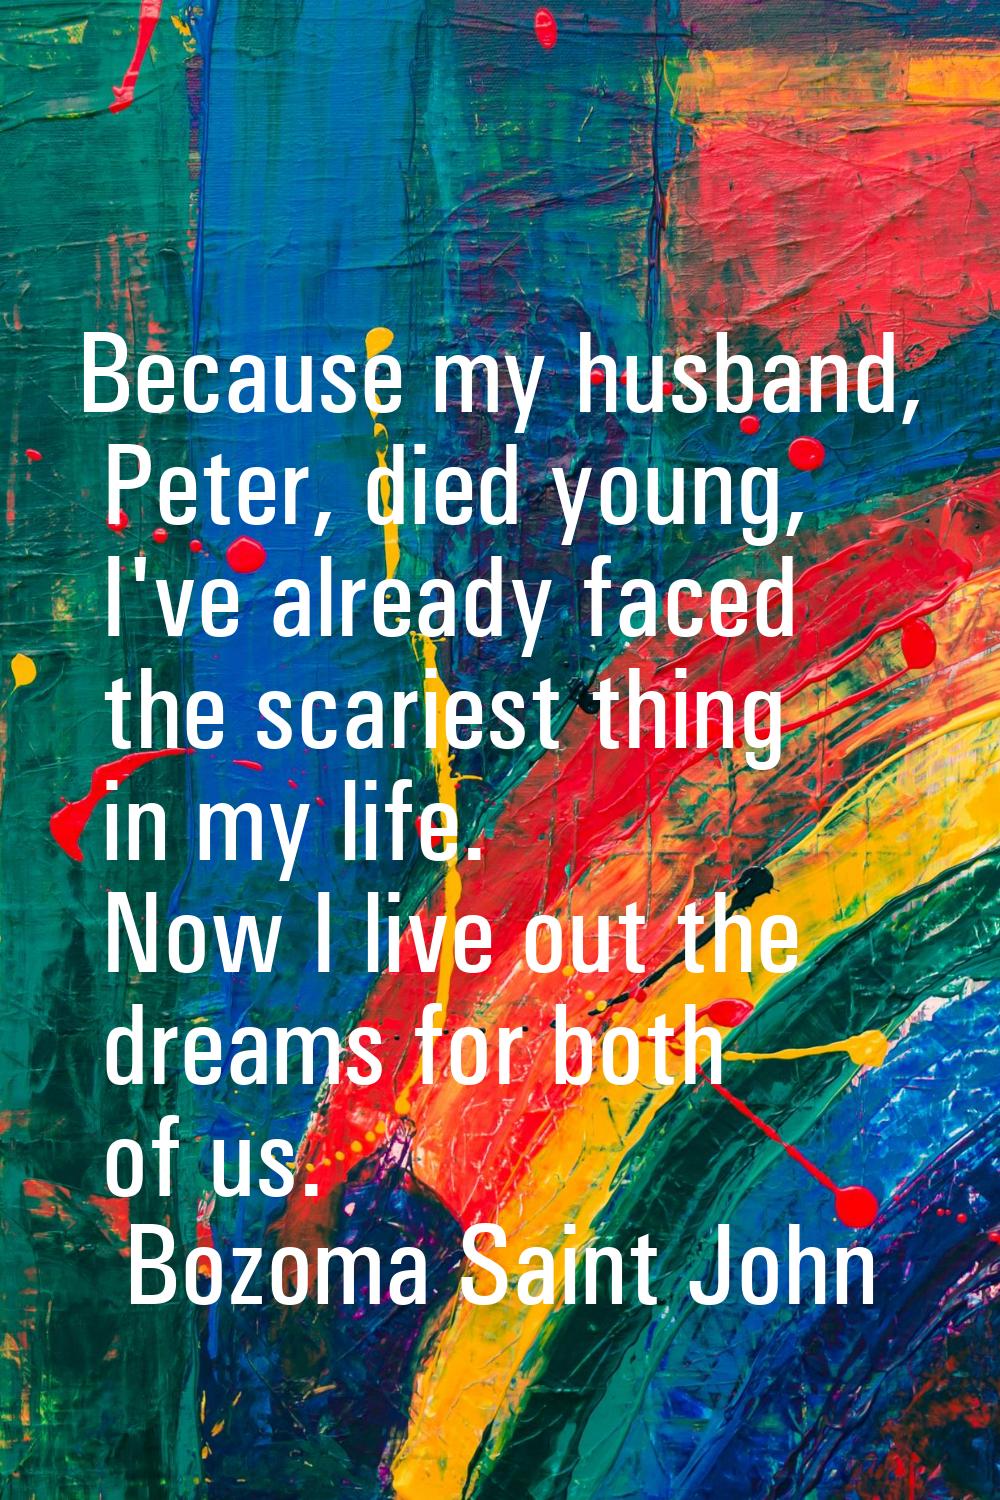 Because my husband, Peter, died young, I've already faced the scariest thing in my life. Now I live